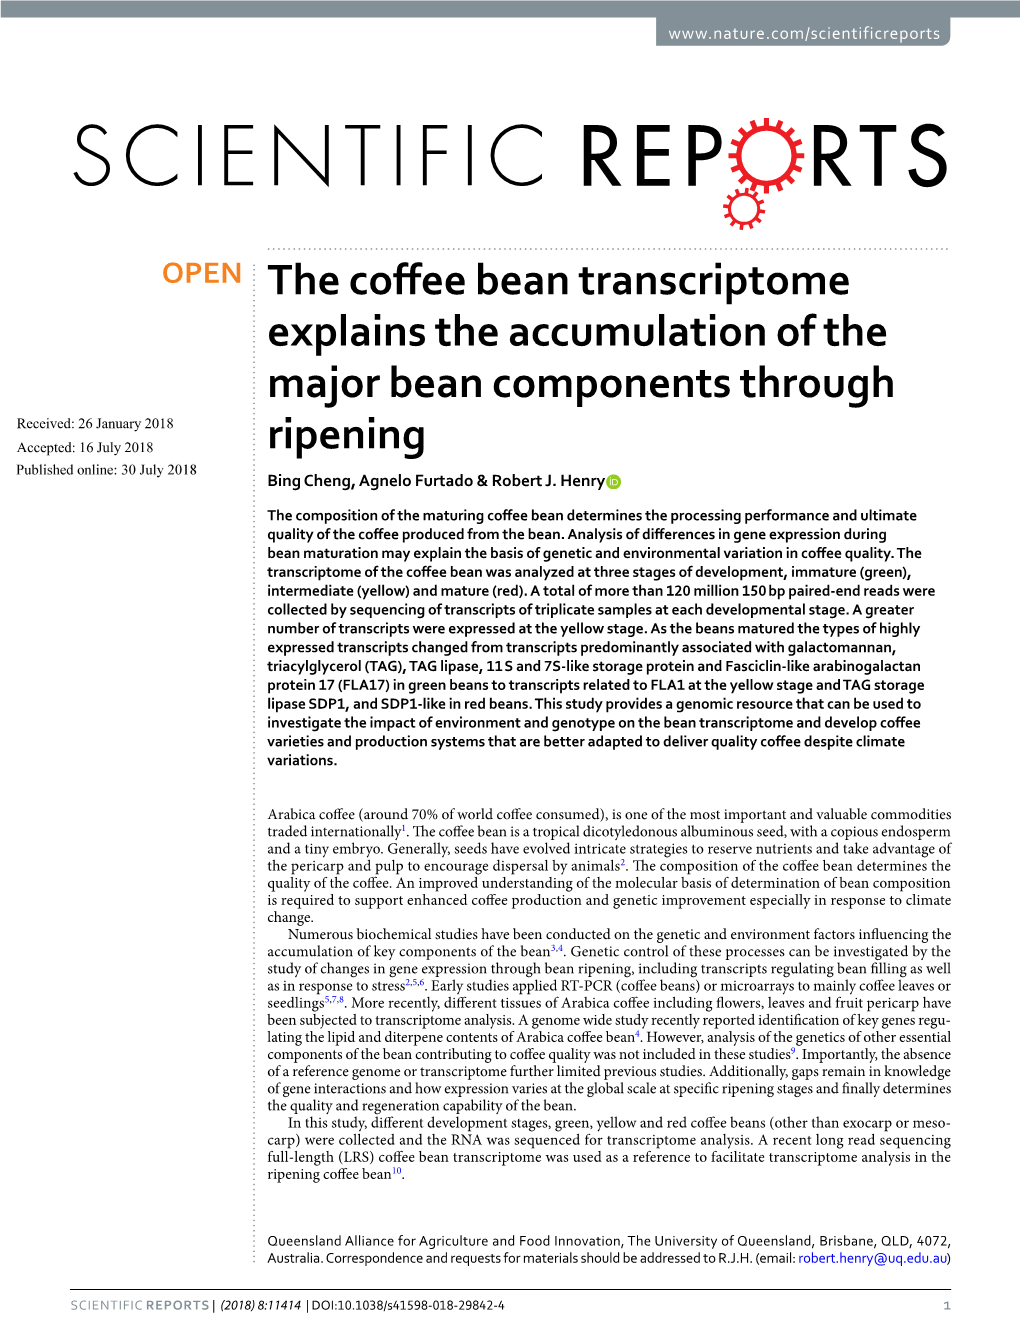 The Coffee Bean Transcriptome Explains the Accumulation of The